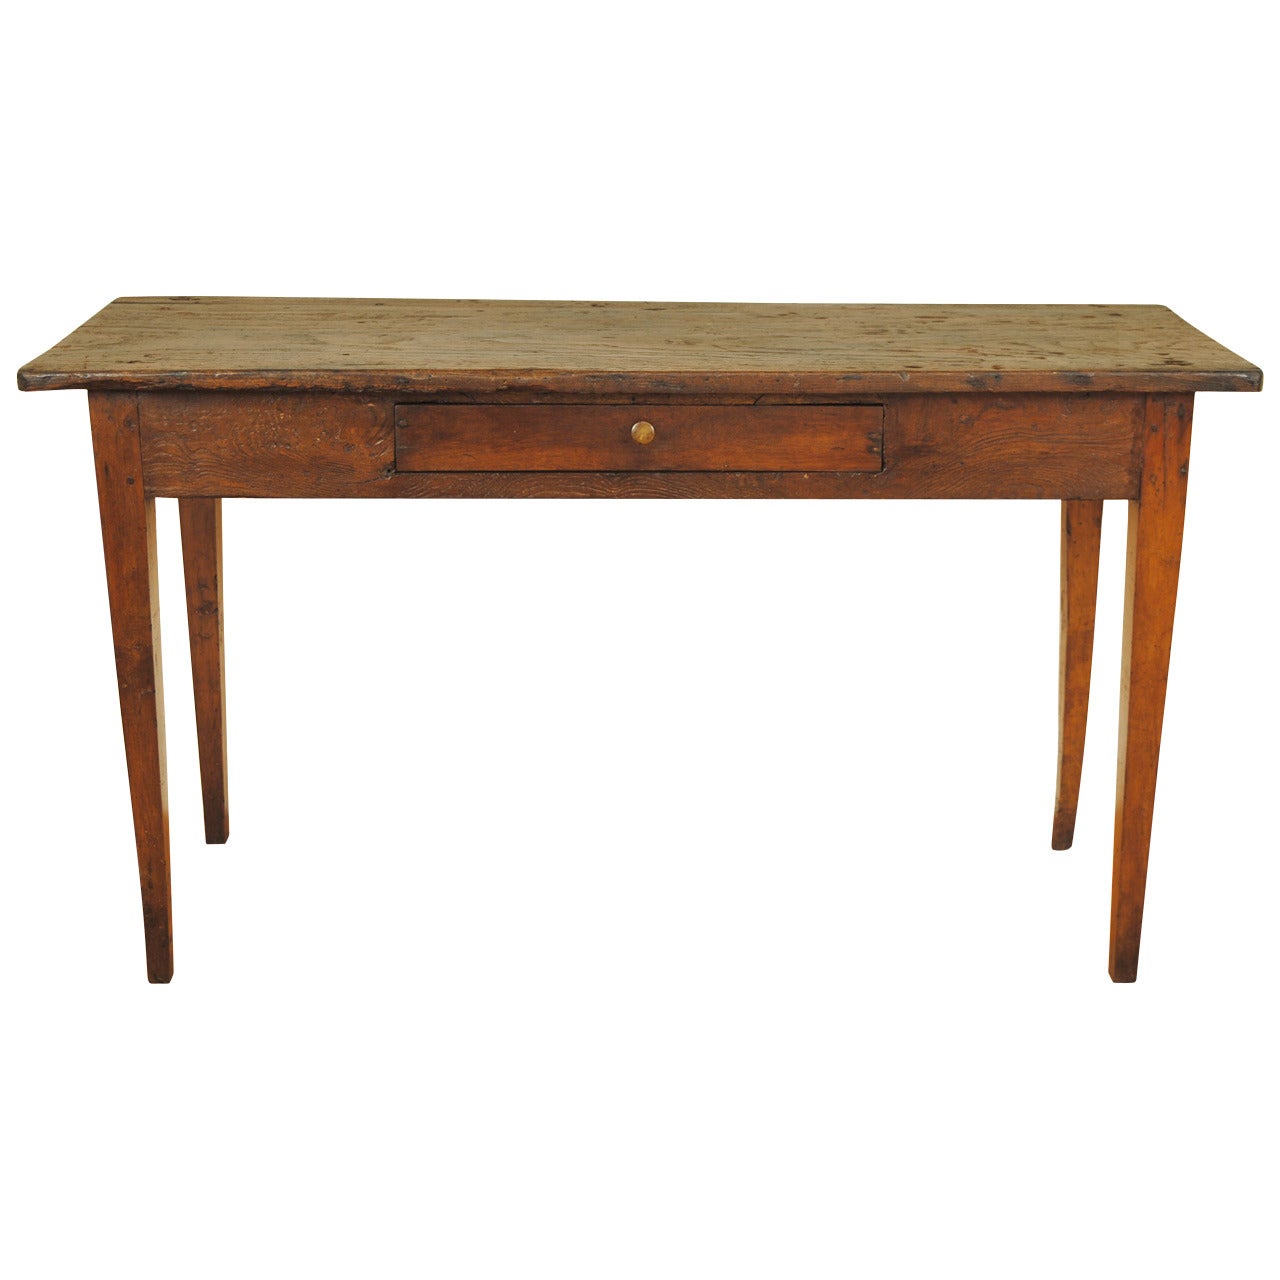 Italian Neoclassical Stained Ashwood and Pinewood Single-Drawer Console Table